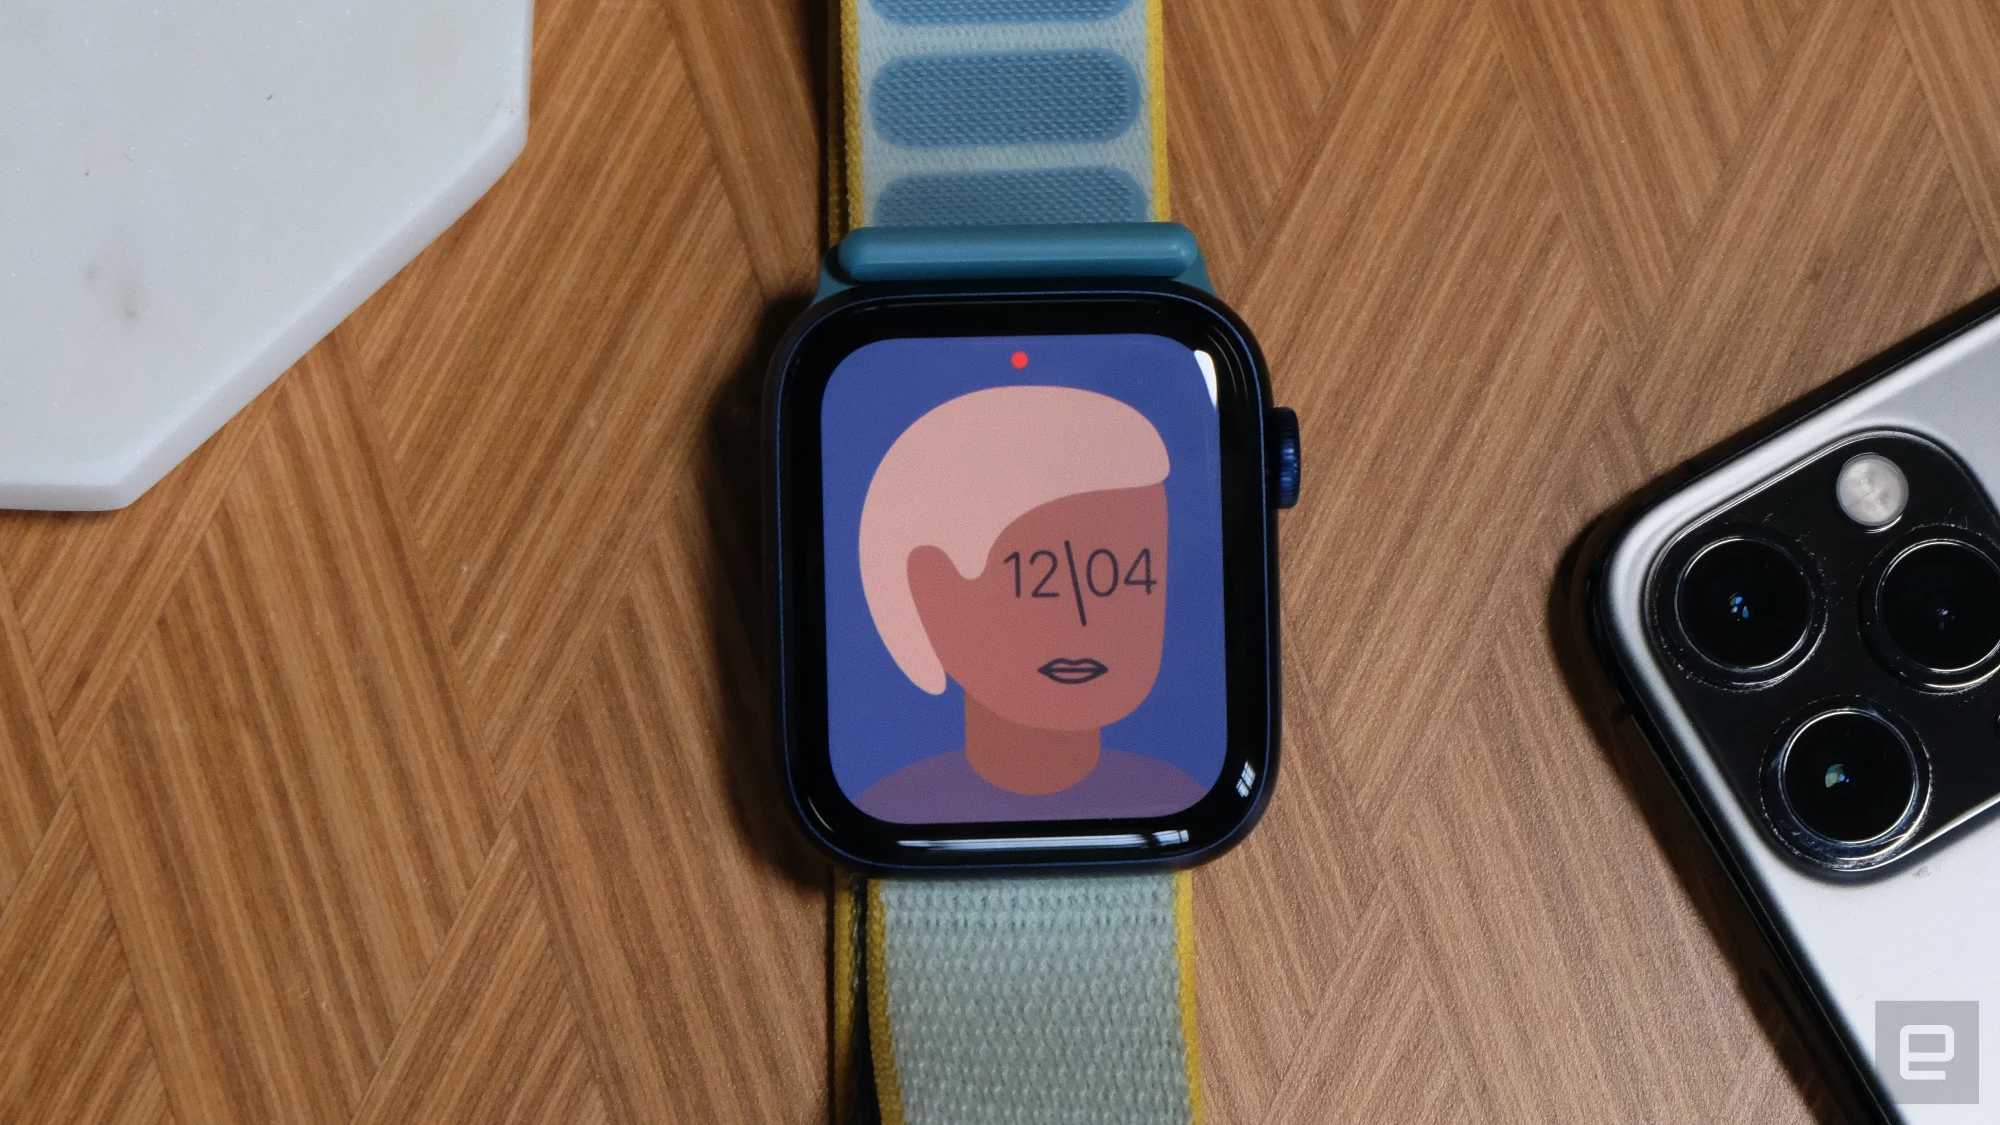 Apple leads the way as smartwatches dominate the wearable band market